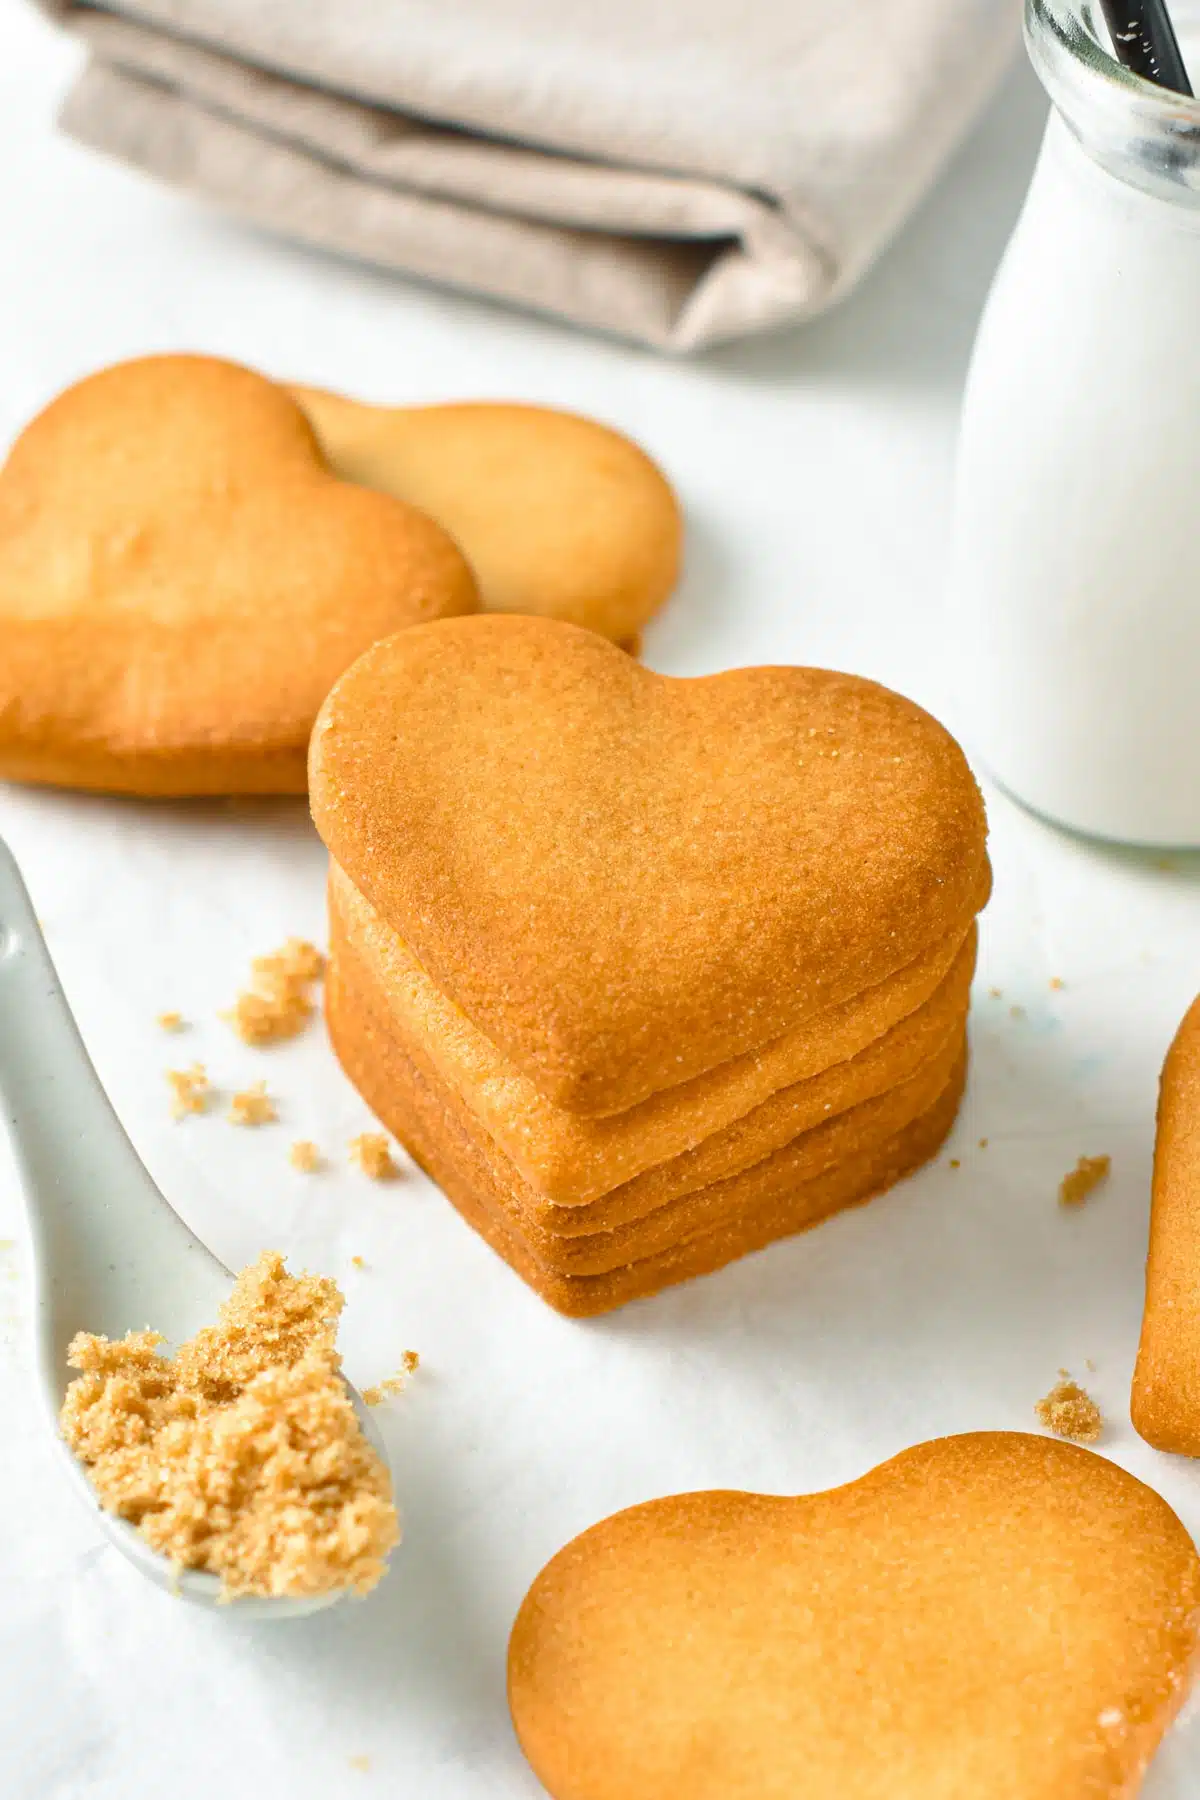 These 3 Ingredient Brown Sugar Cookies are crunchy, cut-out sugar cookies made from brown sugar. Plus, they are allergy friendly too, made without eggs, nut-free and dairy-free option is provided.